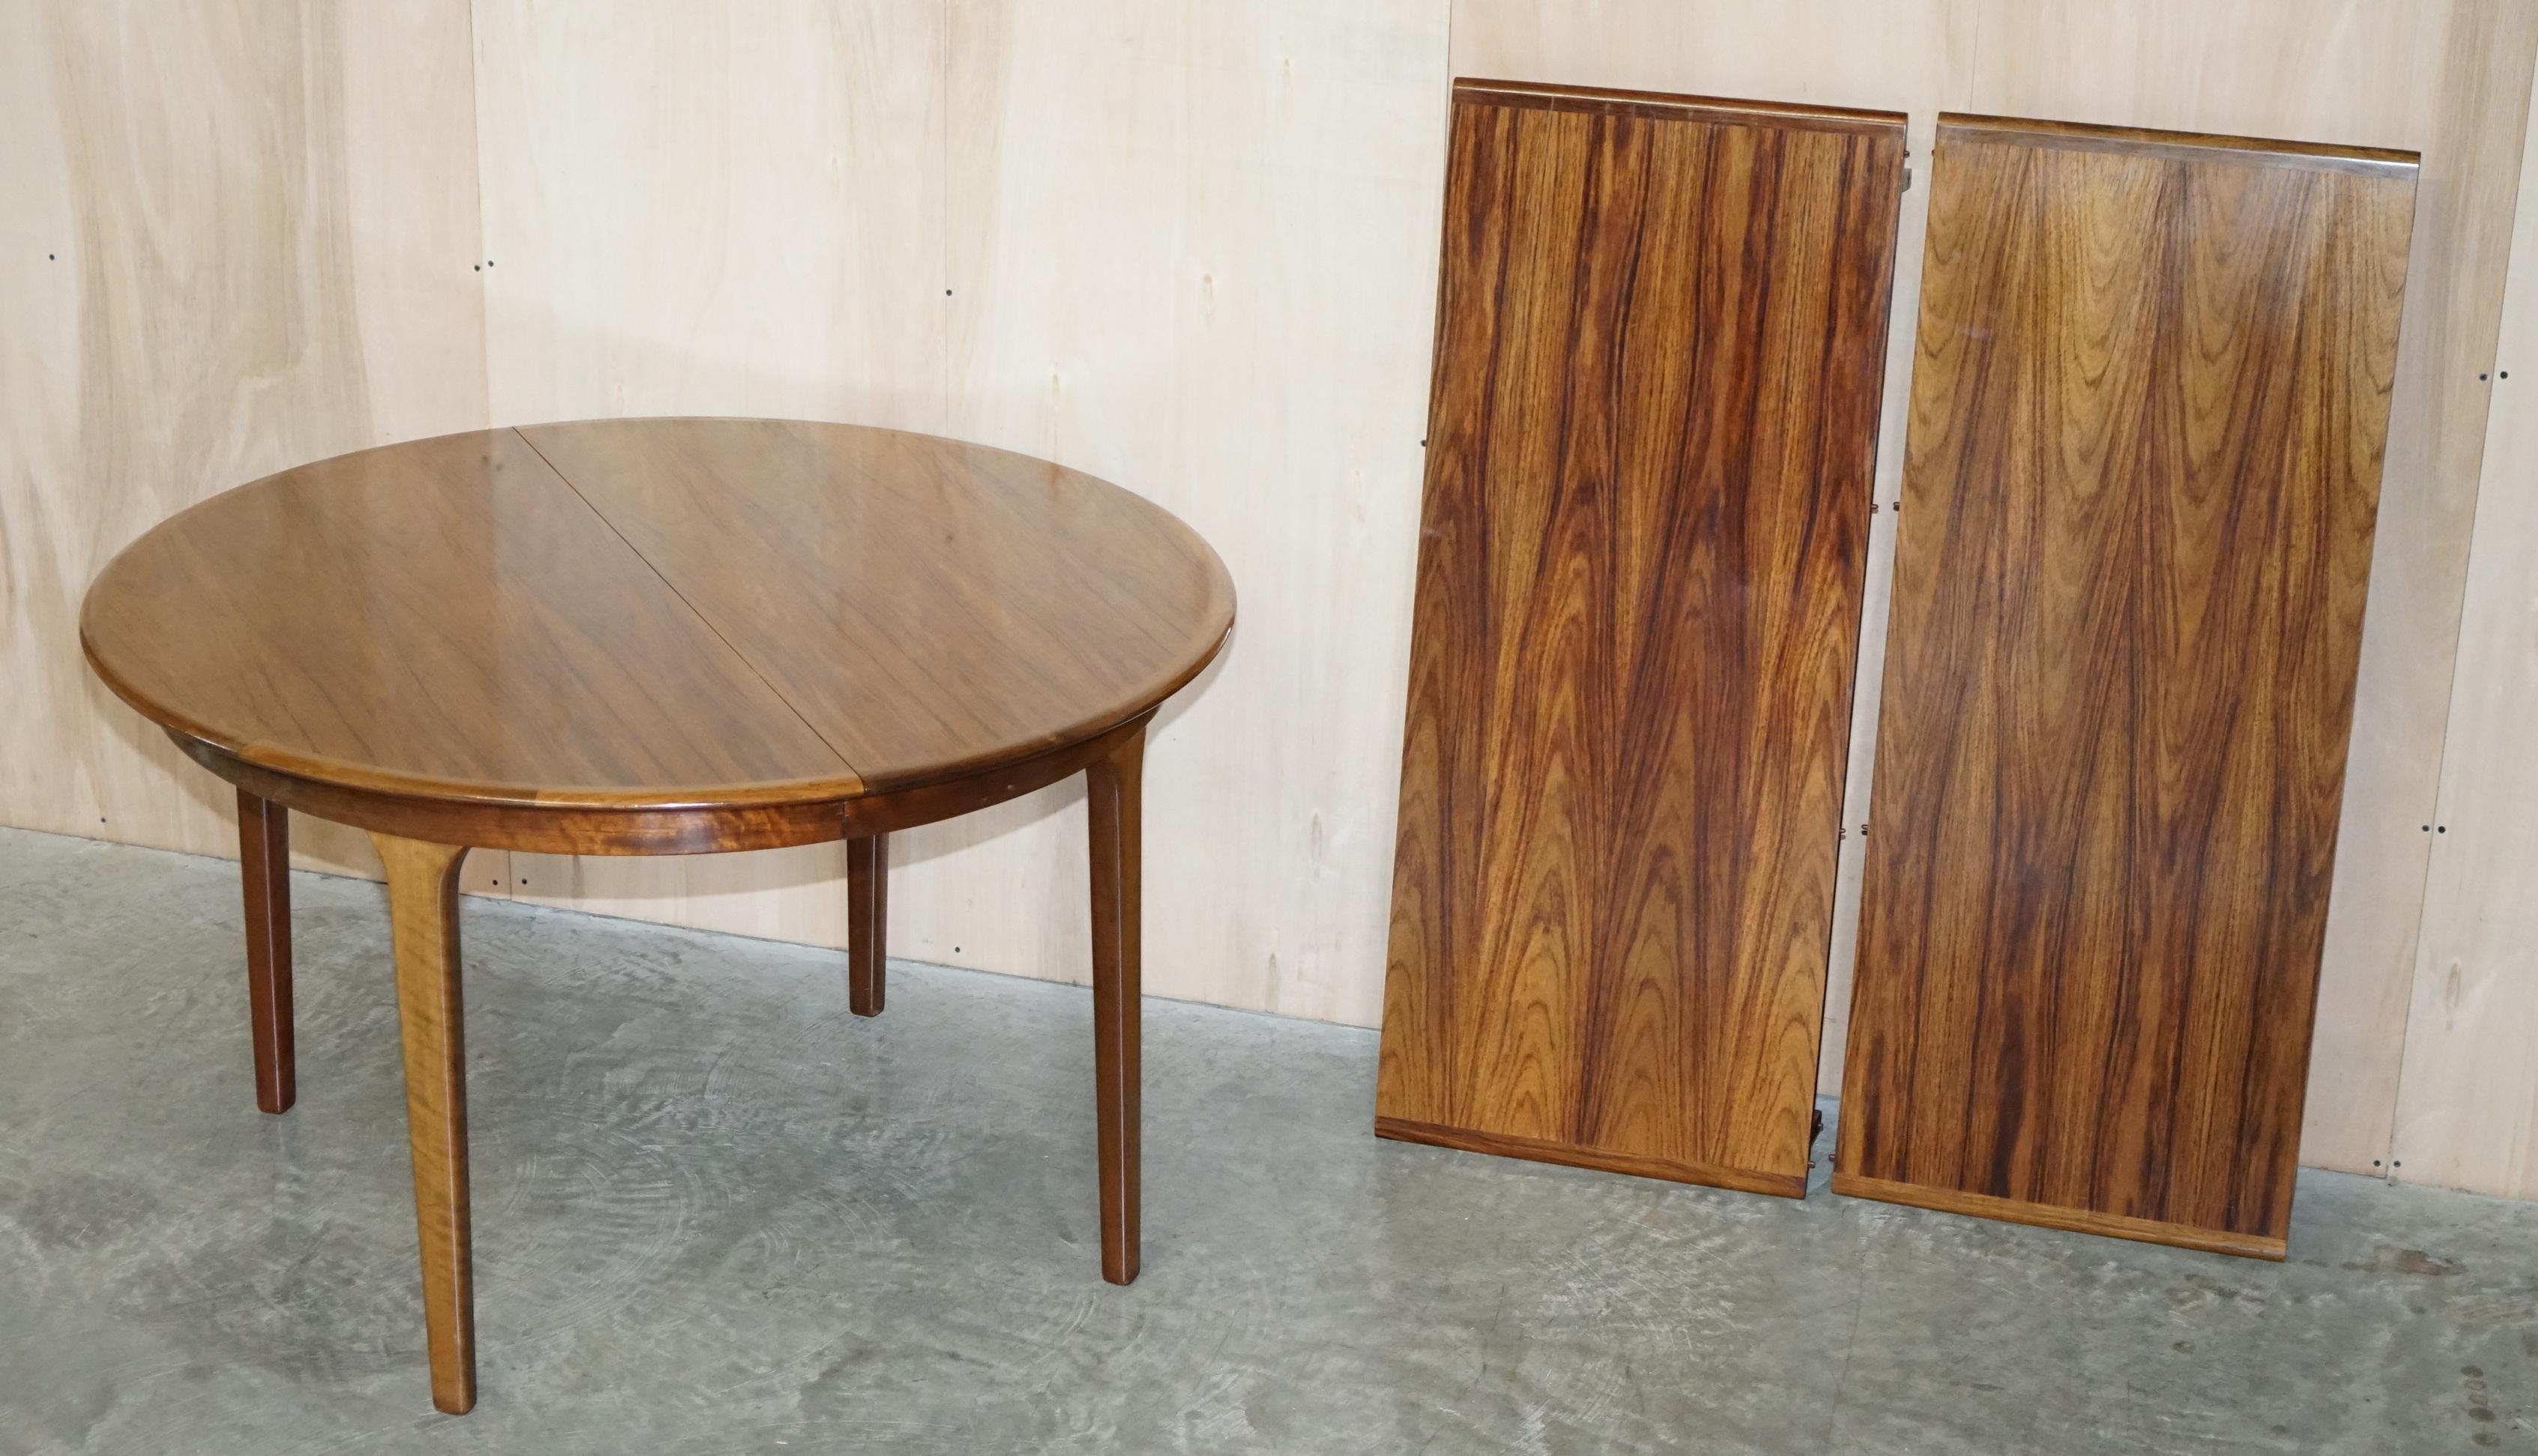 We are delighted to offer for sale this stunning, Mid-Century Modern, Danish Rosewood C.J Rosengaard Danish Rosewood extending dining table that seats up to eight people fully extended

It is very utilitarian, starting as a four-person table,